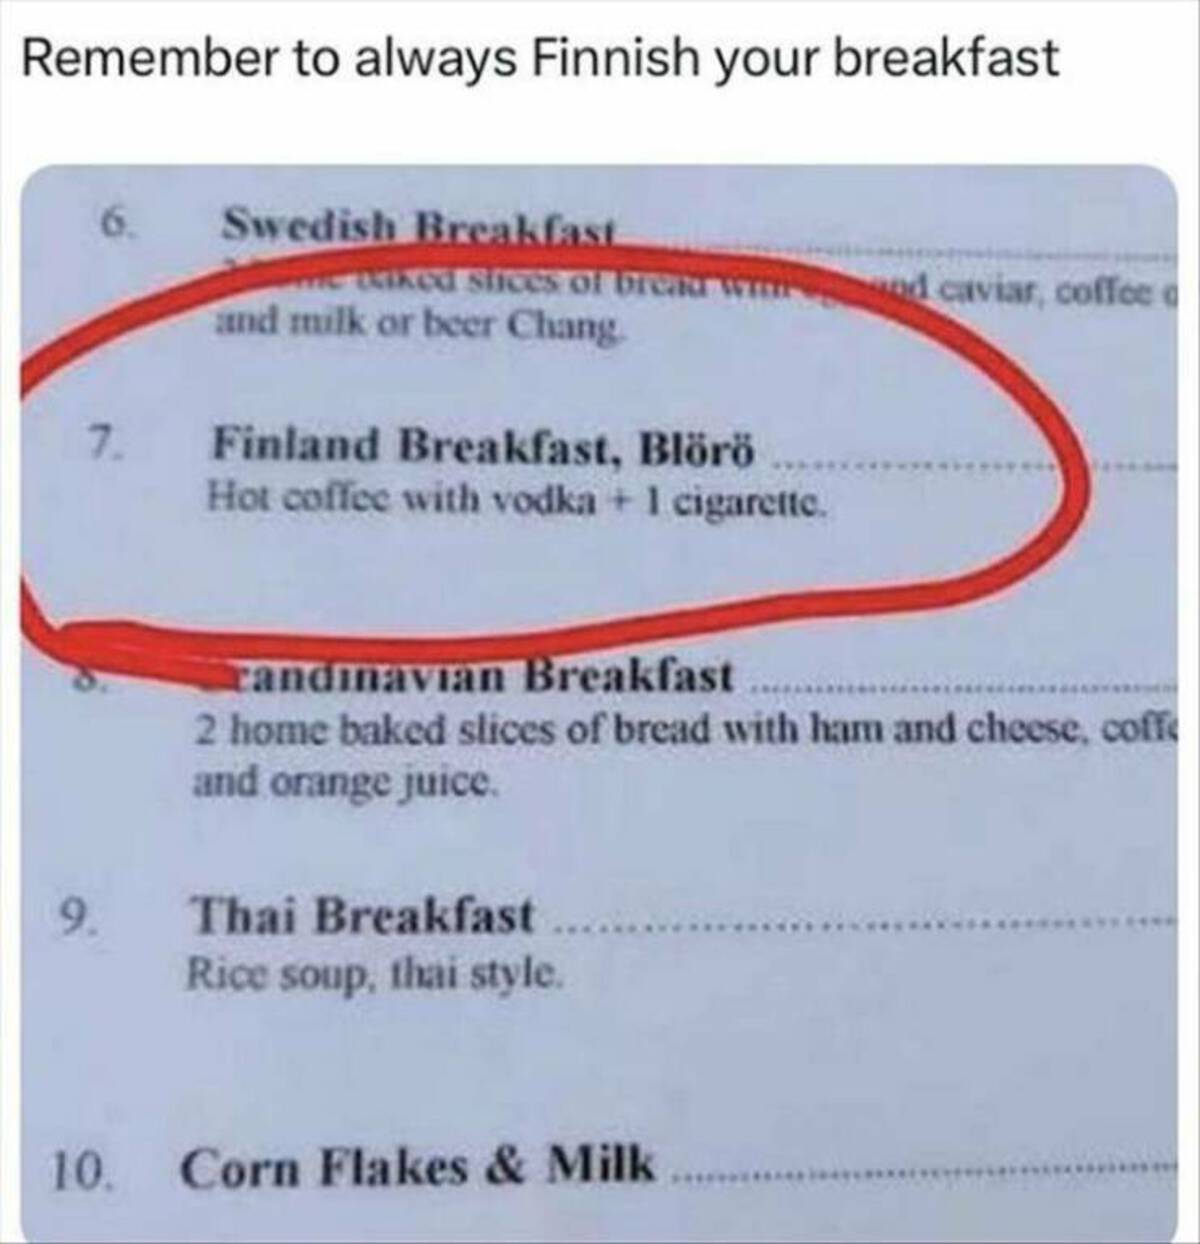 document - Remember to always Finnish your breakfast Swedish Breakfast me teiked slices of bread and milk or beer Chang. 7. Finland Breakfast, Blr Hot coffee with vodka 1 cigarette. nd caviar, coffee randinavian Breakfast 2 home baked slices of bread with